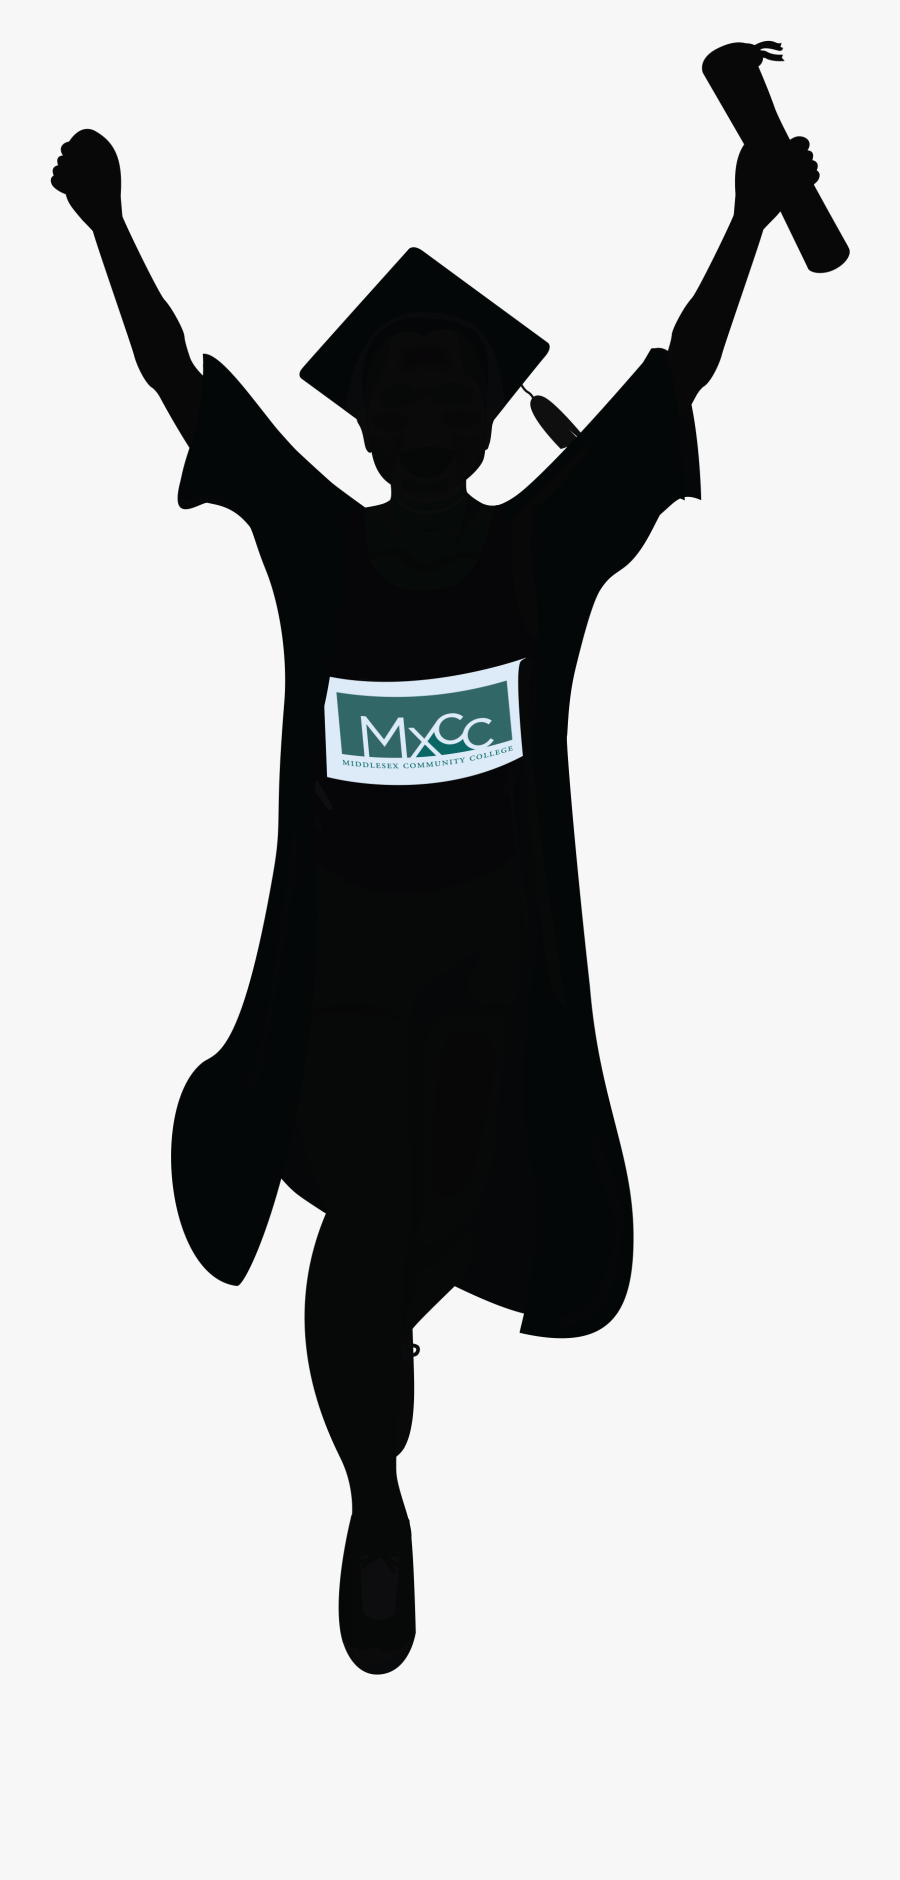 Middlesex Community College, Transparent Clipart